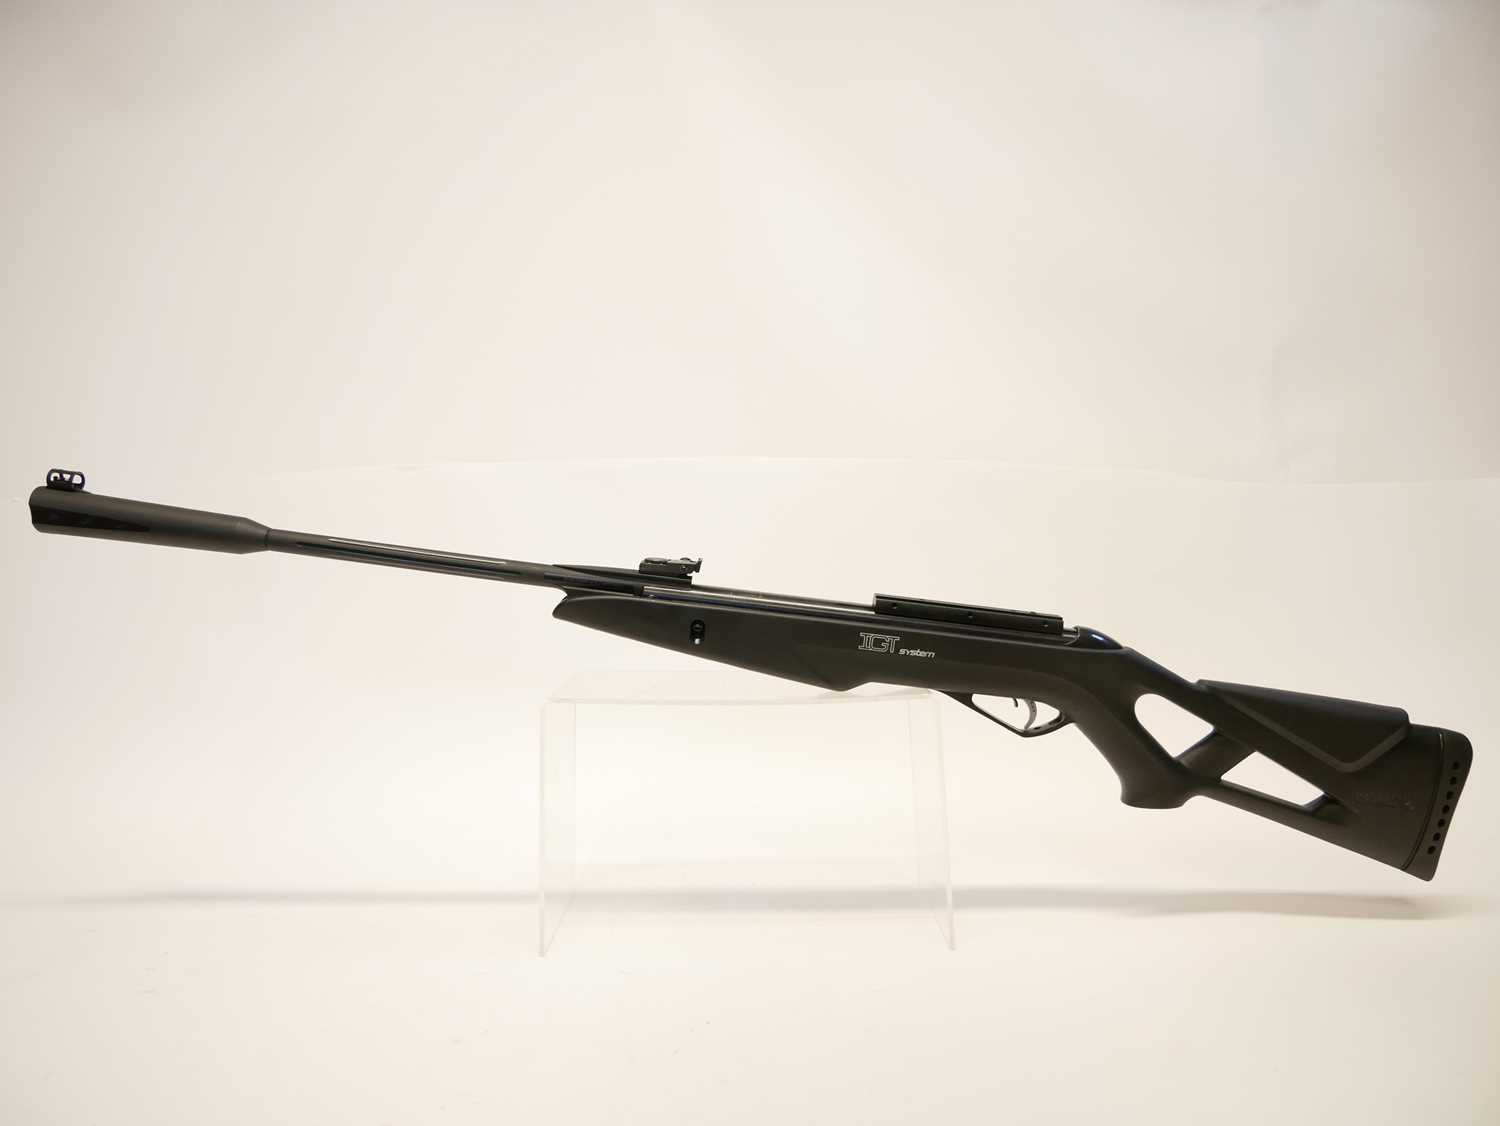 Gamo Whisper IGT system .22 air rifle, serial number 04-1C-520098-14, 20.5inch sighted barrel, black - Image 9 of 10